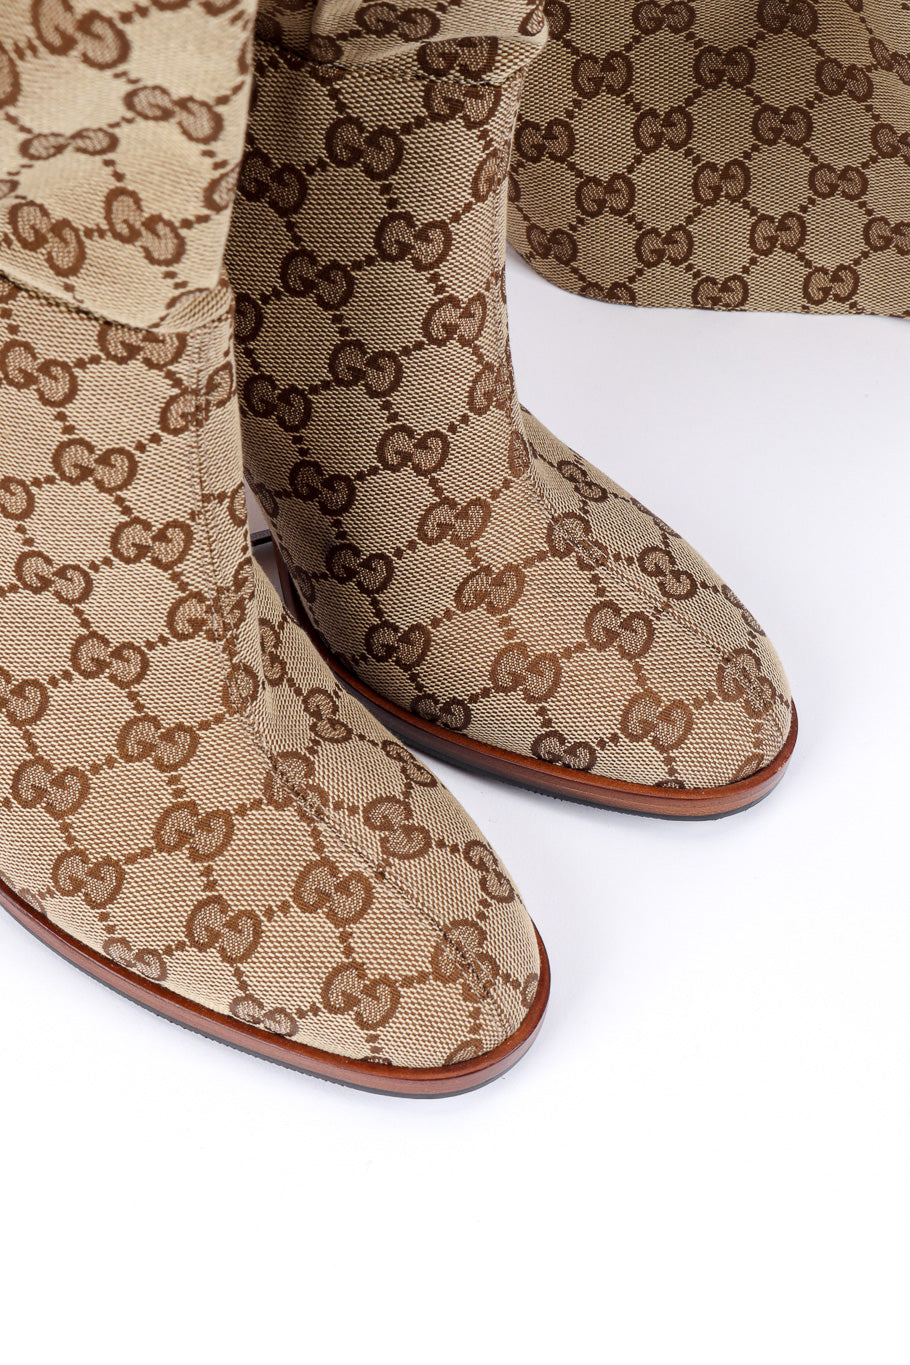 GG Monogram Over-the-Knee-Boots by Gucci toes @recessla